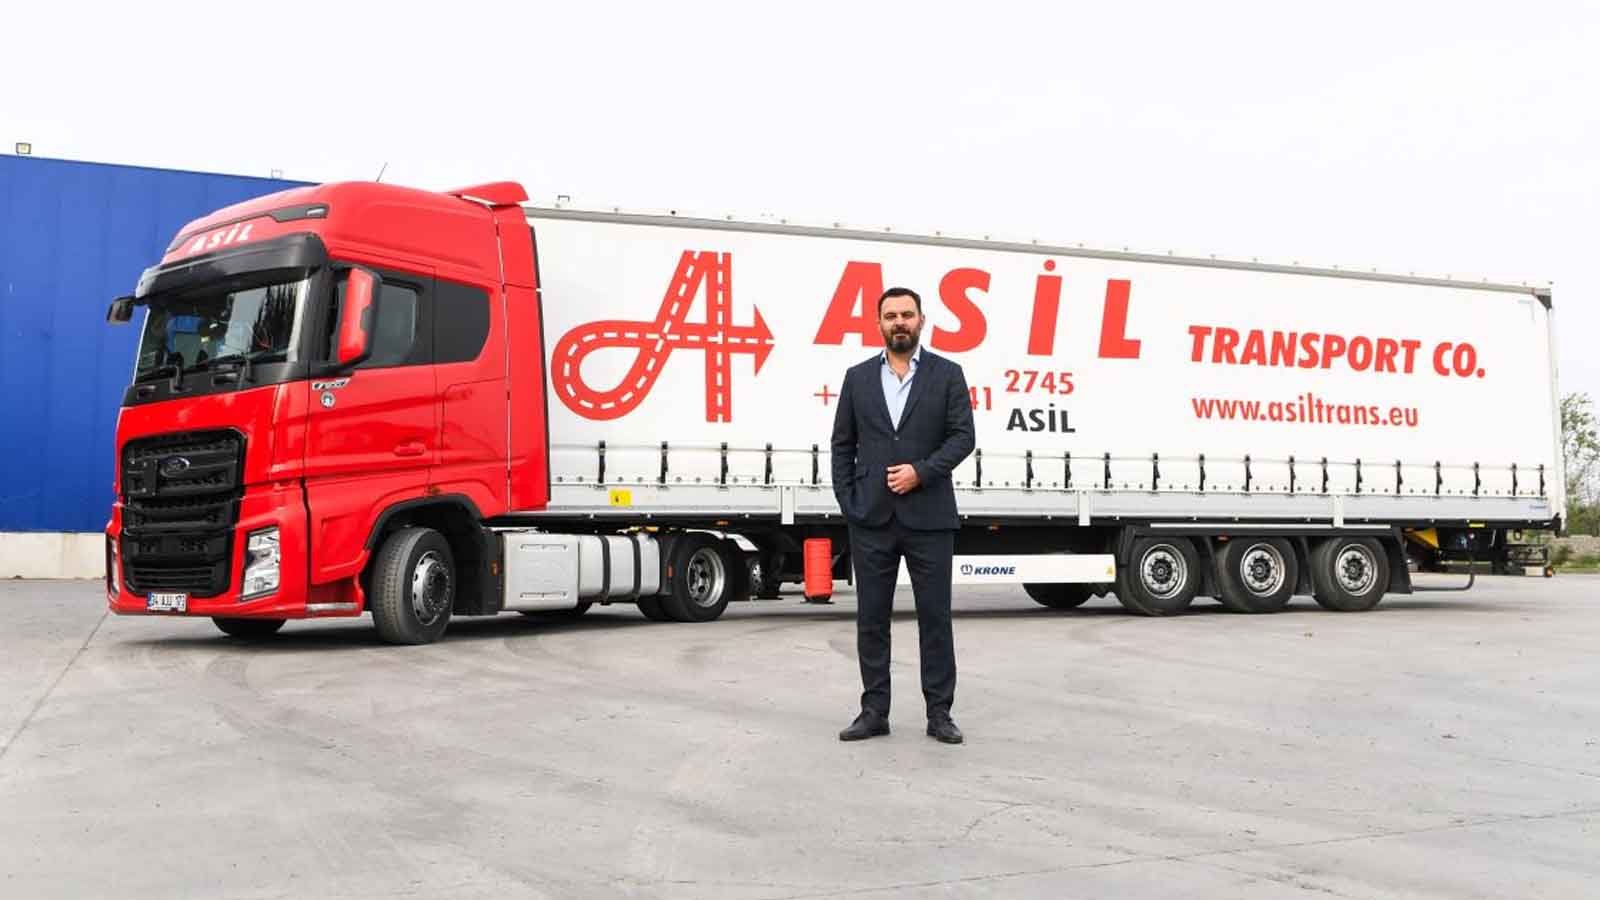 Visa Chaos In The Logistics Sector Assessments By Armağan Şahin, President Of Asil Transport Co.